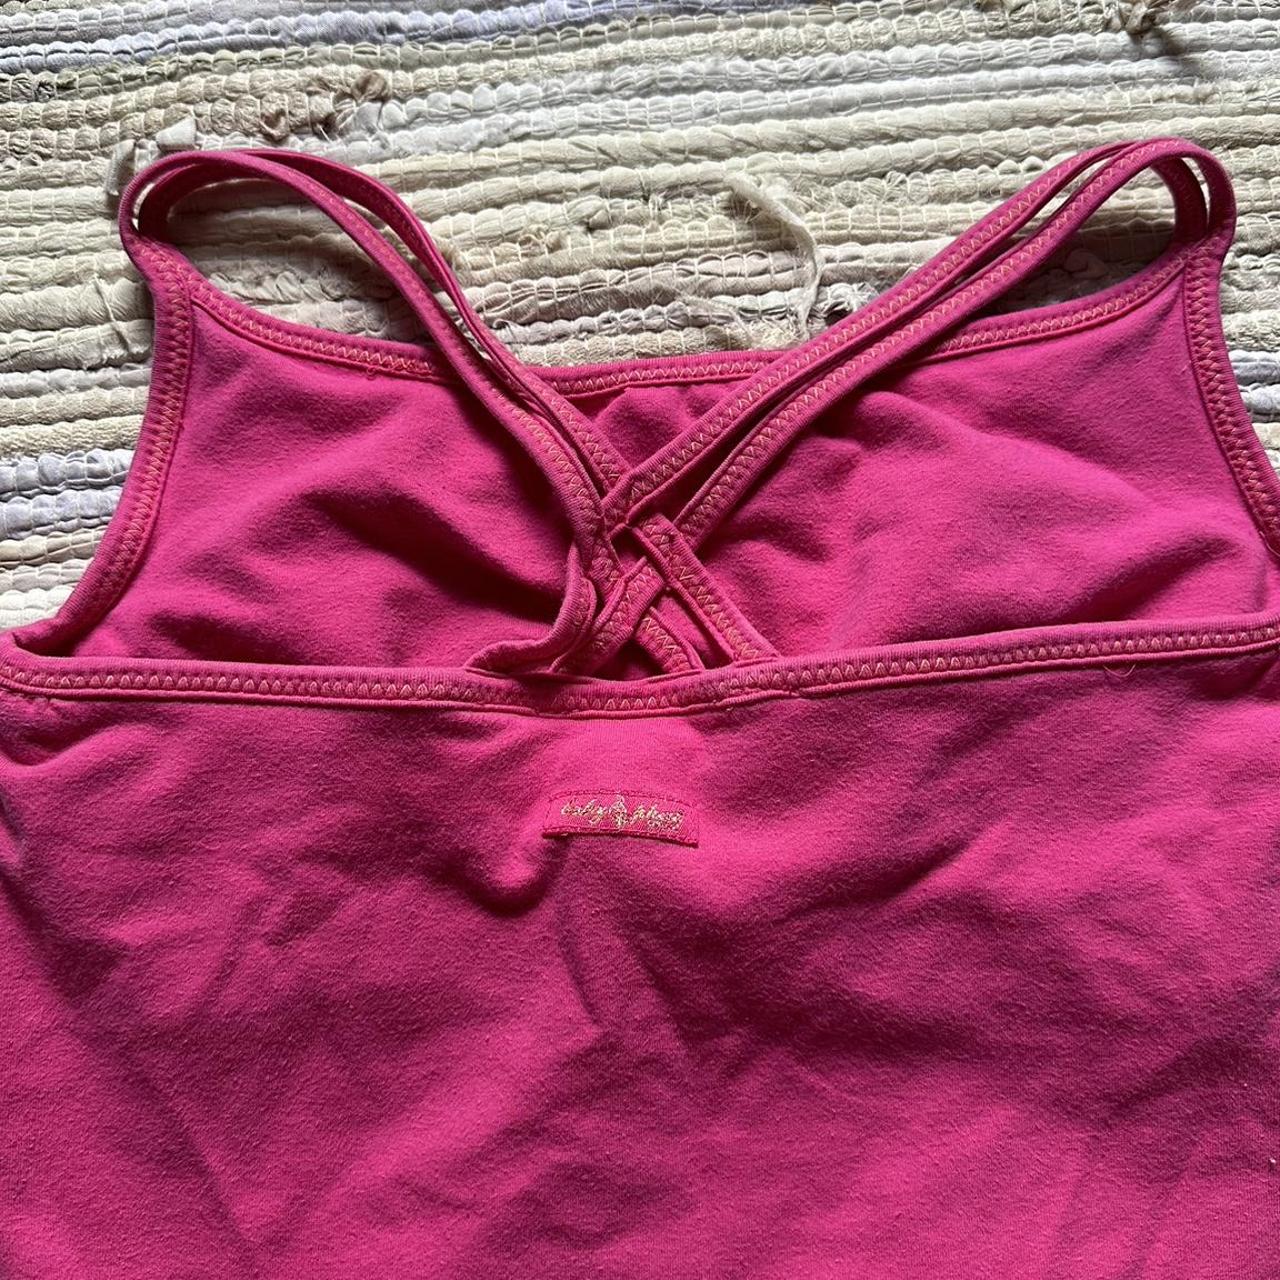 Baby Phat Women's Pink and Yellow Dress | Depop